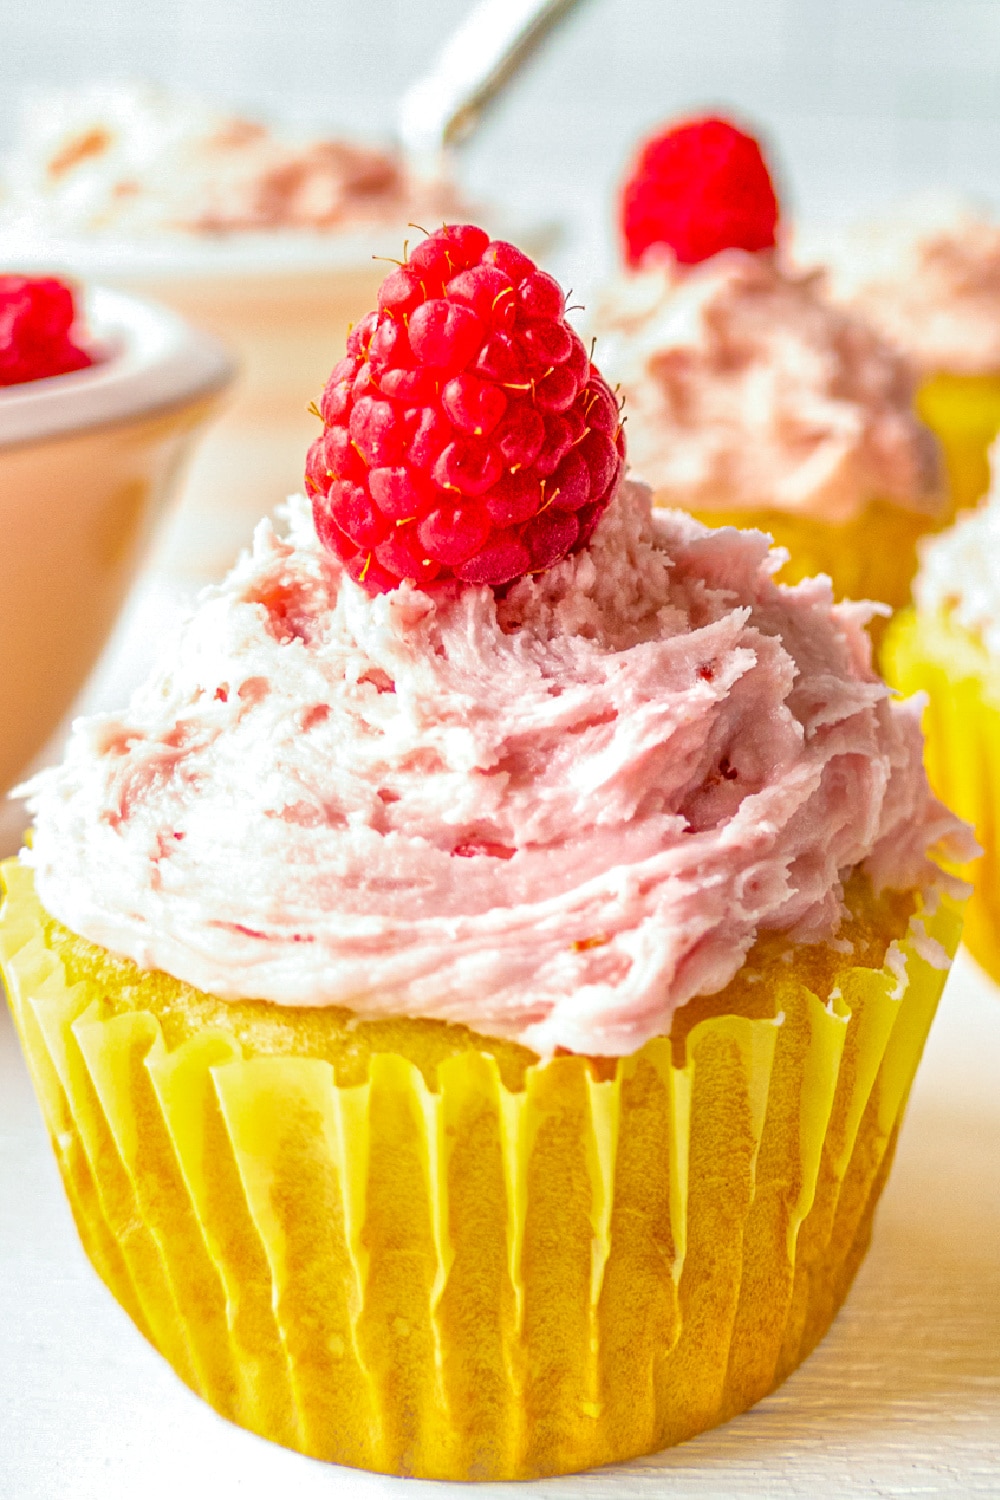 Frosted cupcakes topped with a raspberry sitting in front of a bowl of frosting.